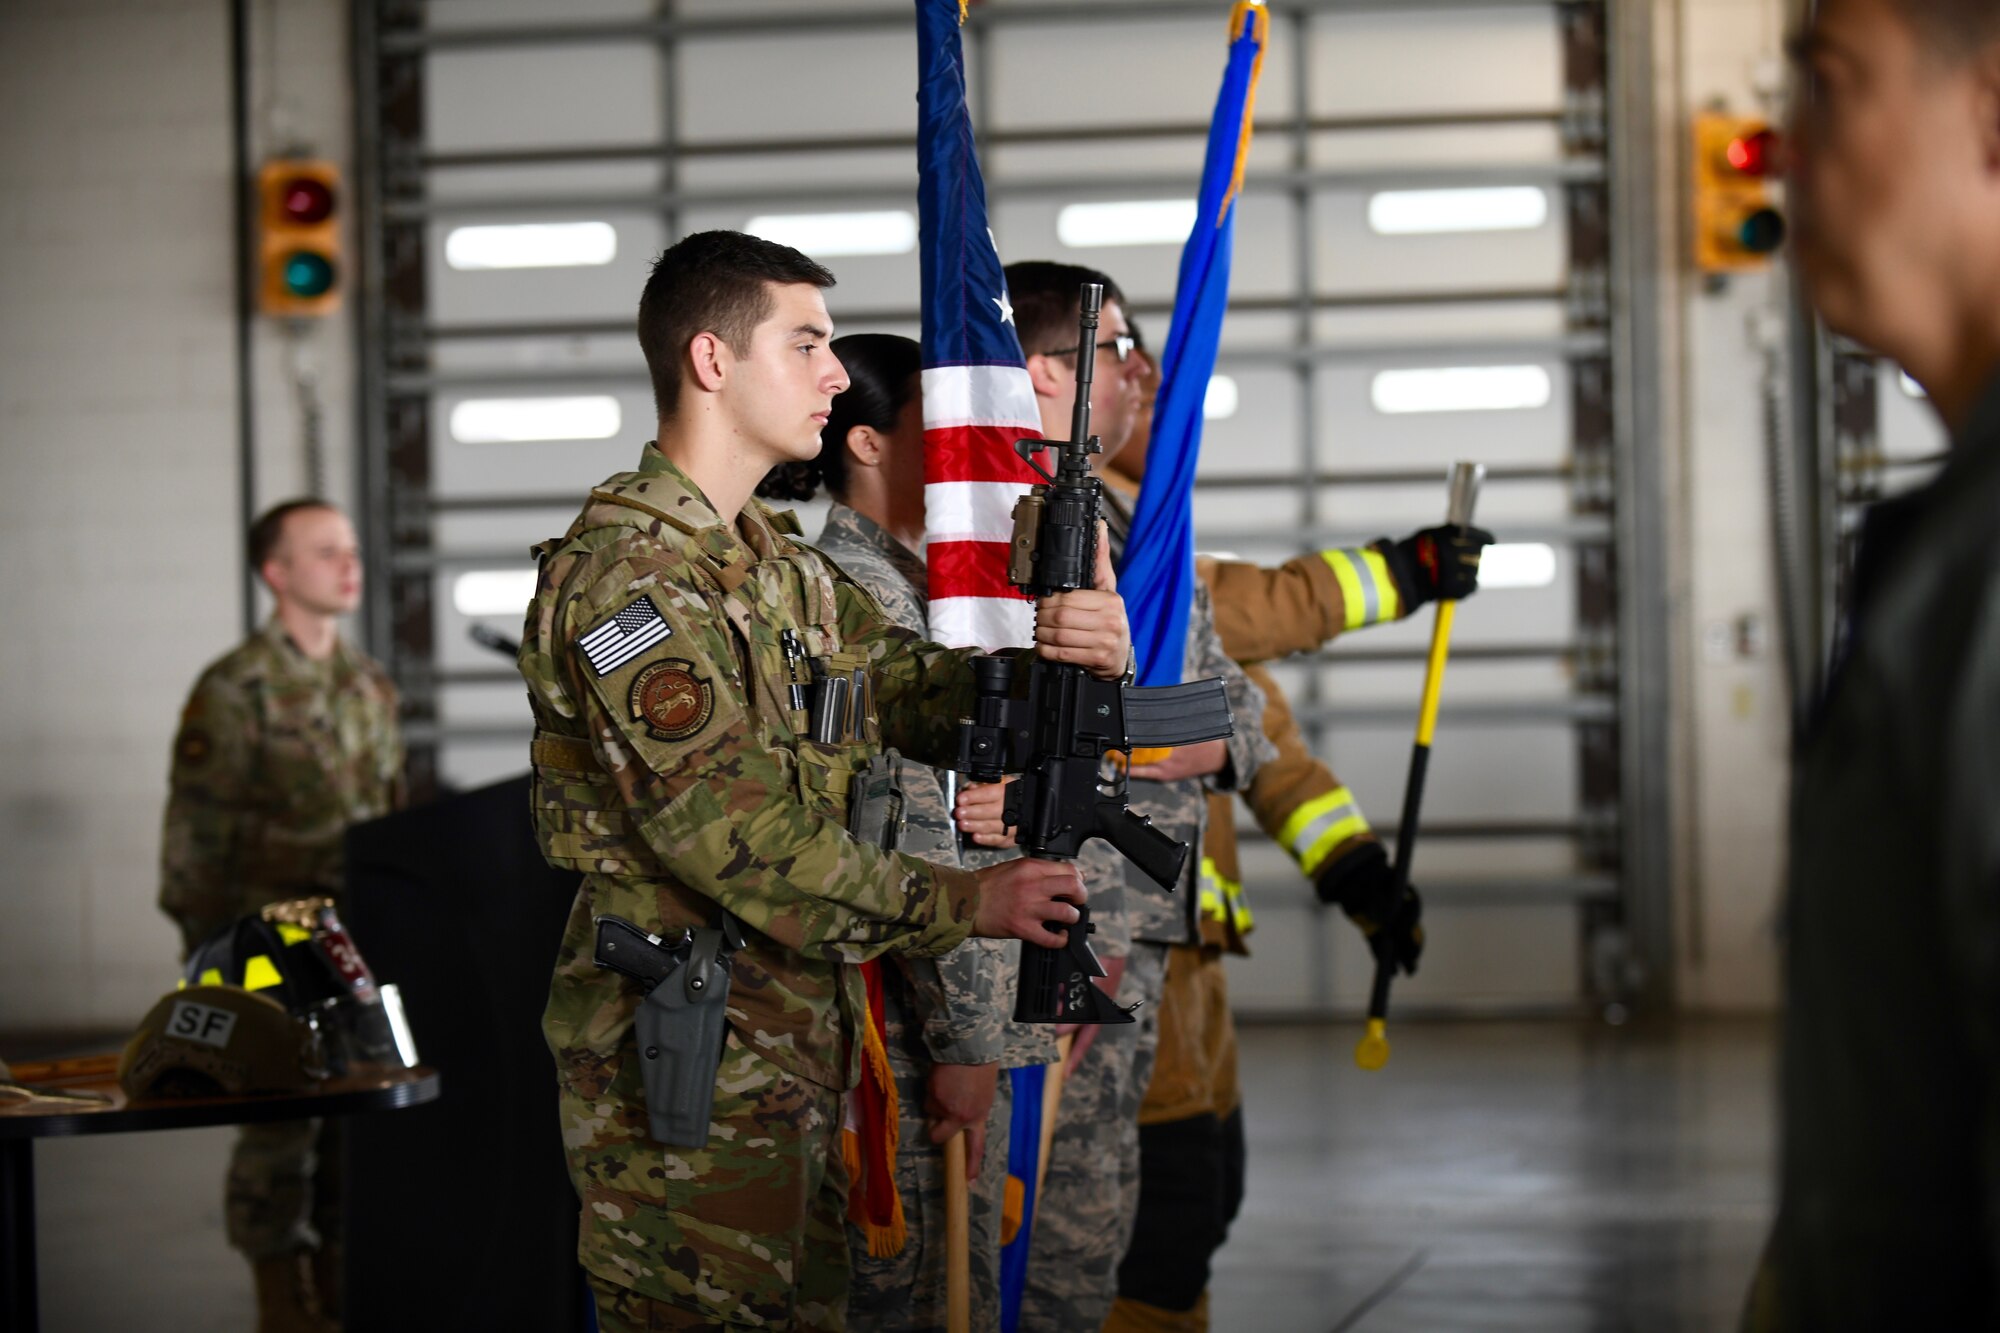 An honor guard, consisting of defenders and firefighter from the 4th Fighter Wing, present the colors during the opening of the 9/11 Remembrance Ceremony at Seymour Johnson Air Force Base, North Carolina, Sept. 11, 2019.